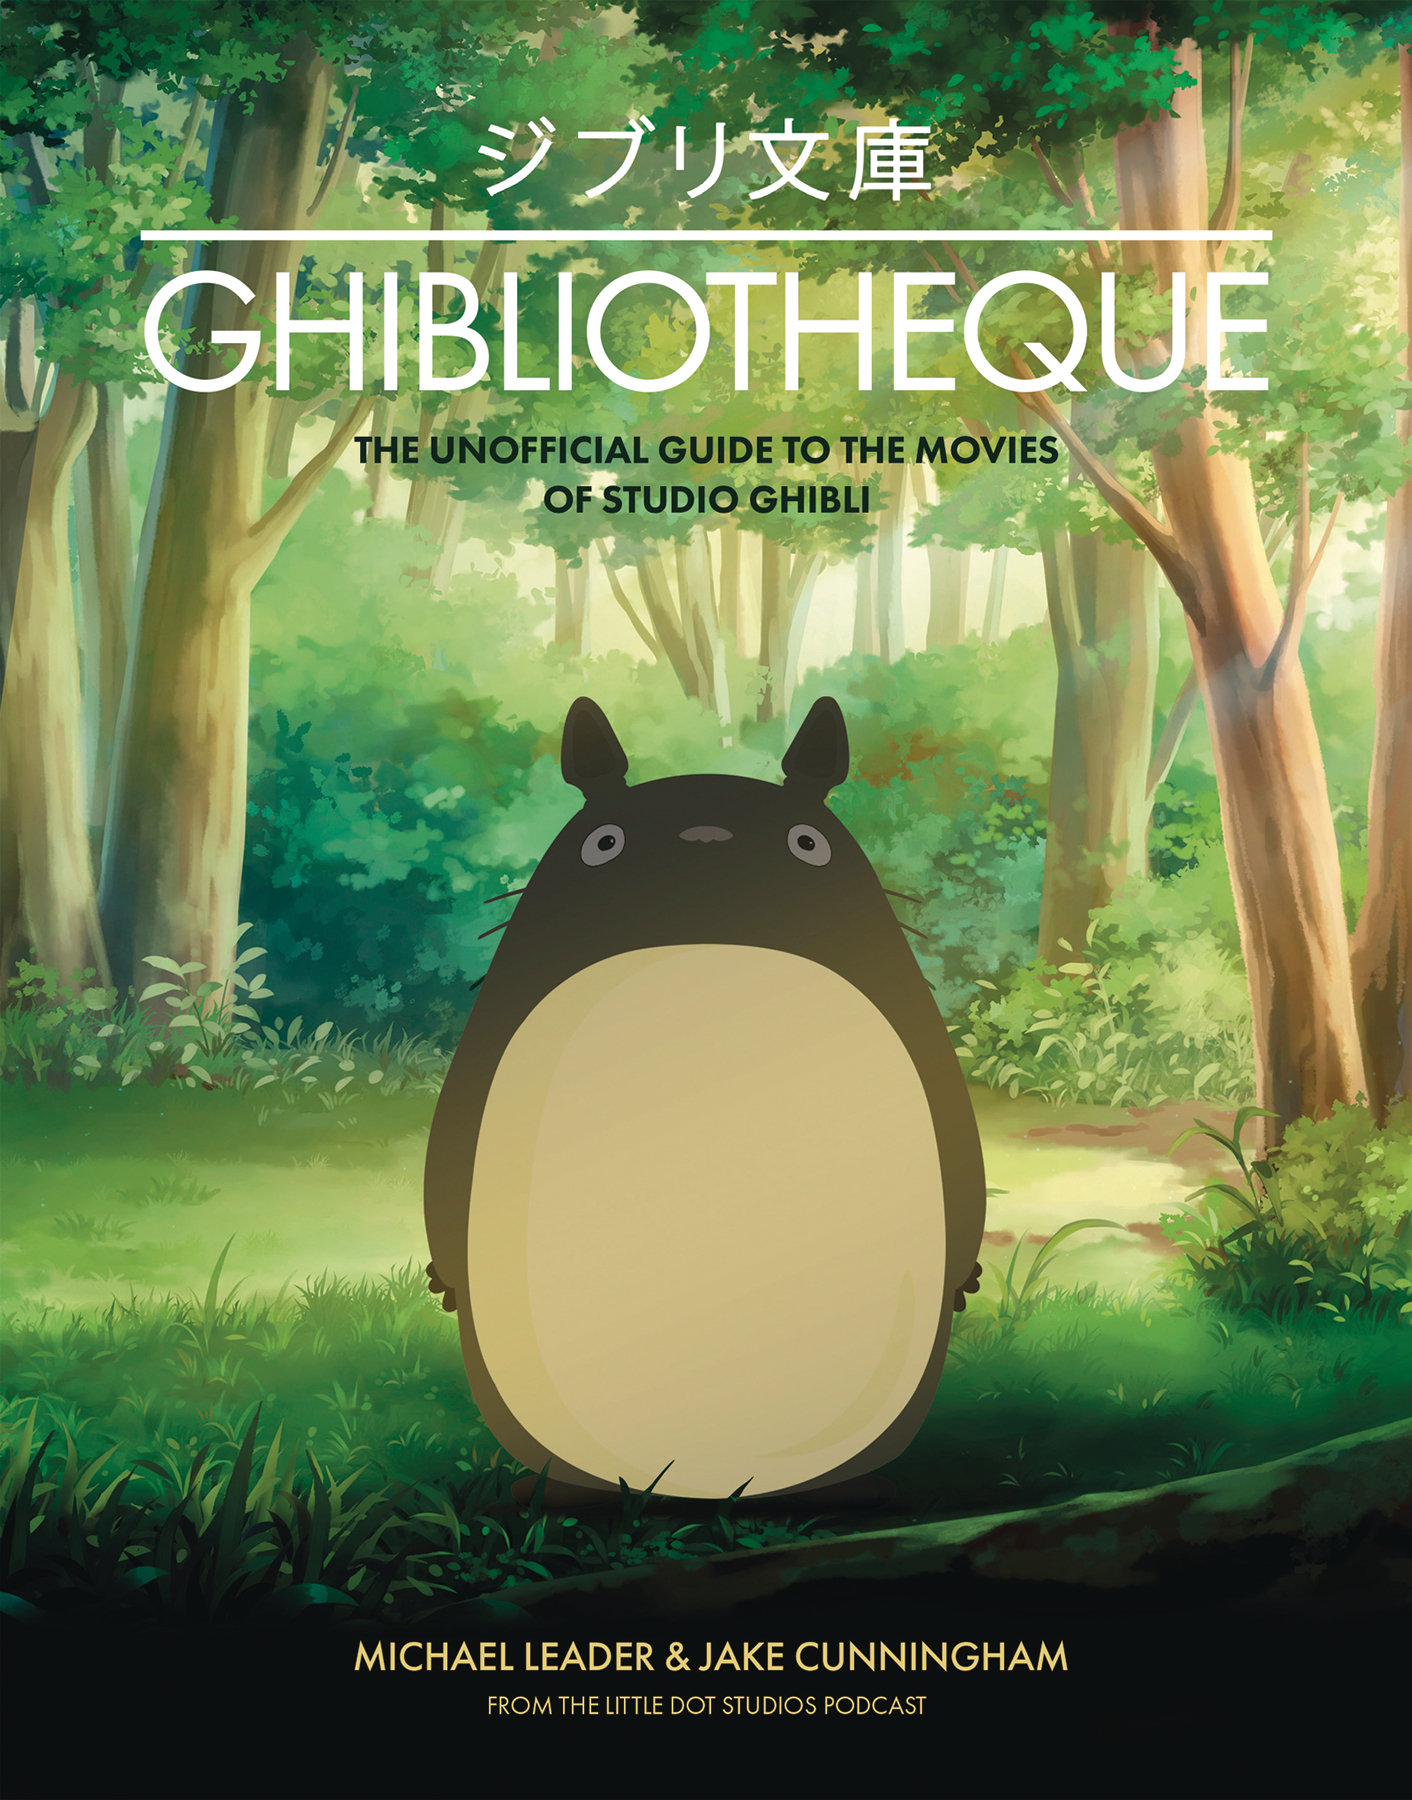 Ghibliotheque Unofficial Guide To Movies of Studio Ghibli Hardcover